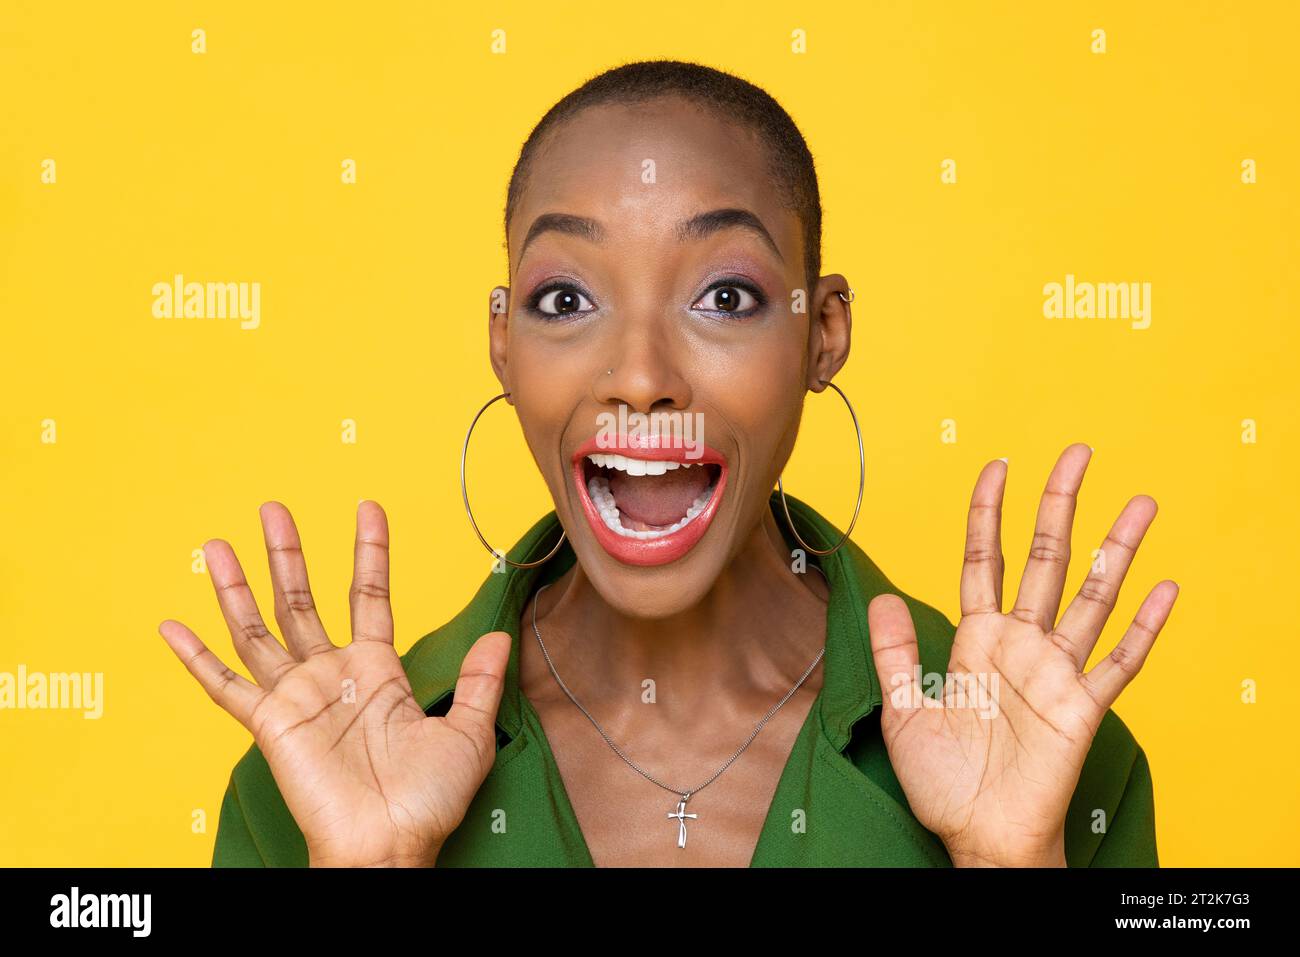 Close-up portrait of scared stupefied african american young woman with shaved head and open palms screaming against isolated yellow background Stock Photo